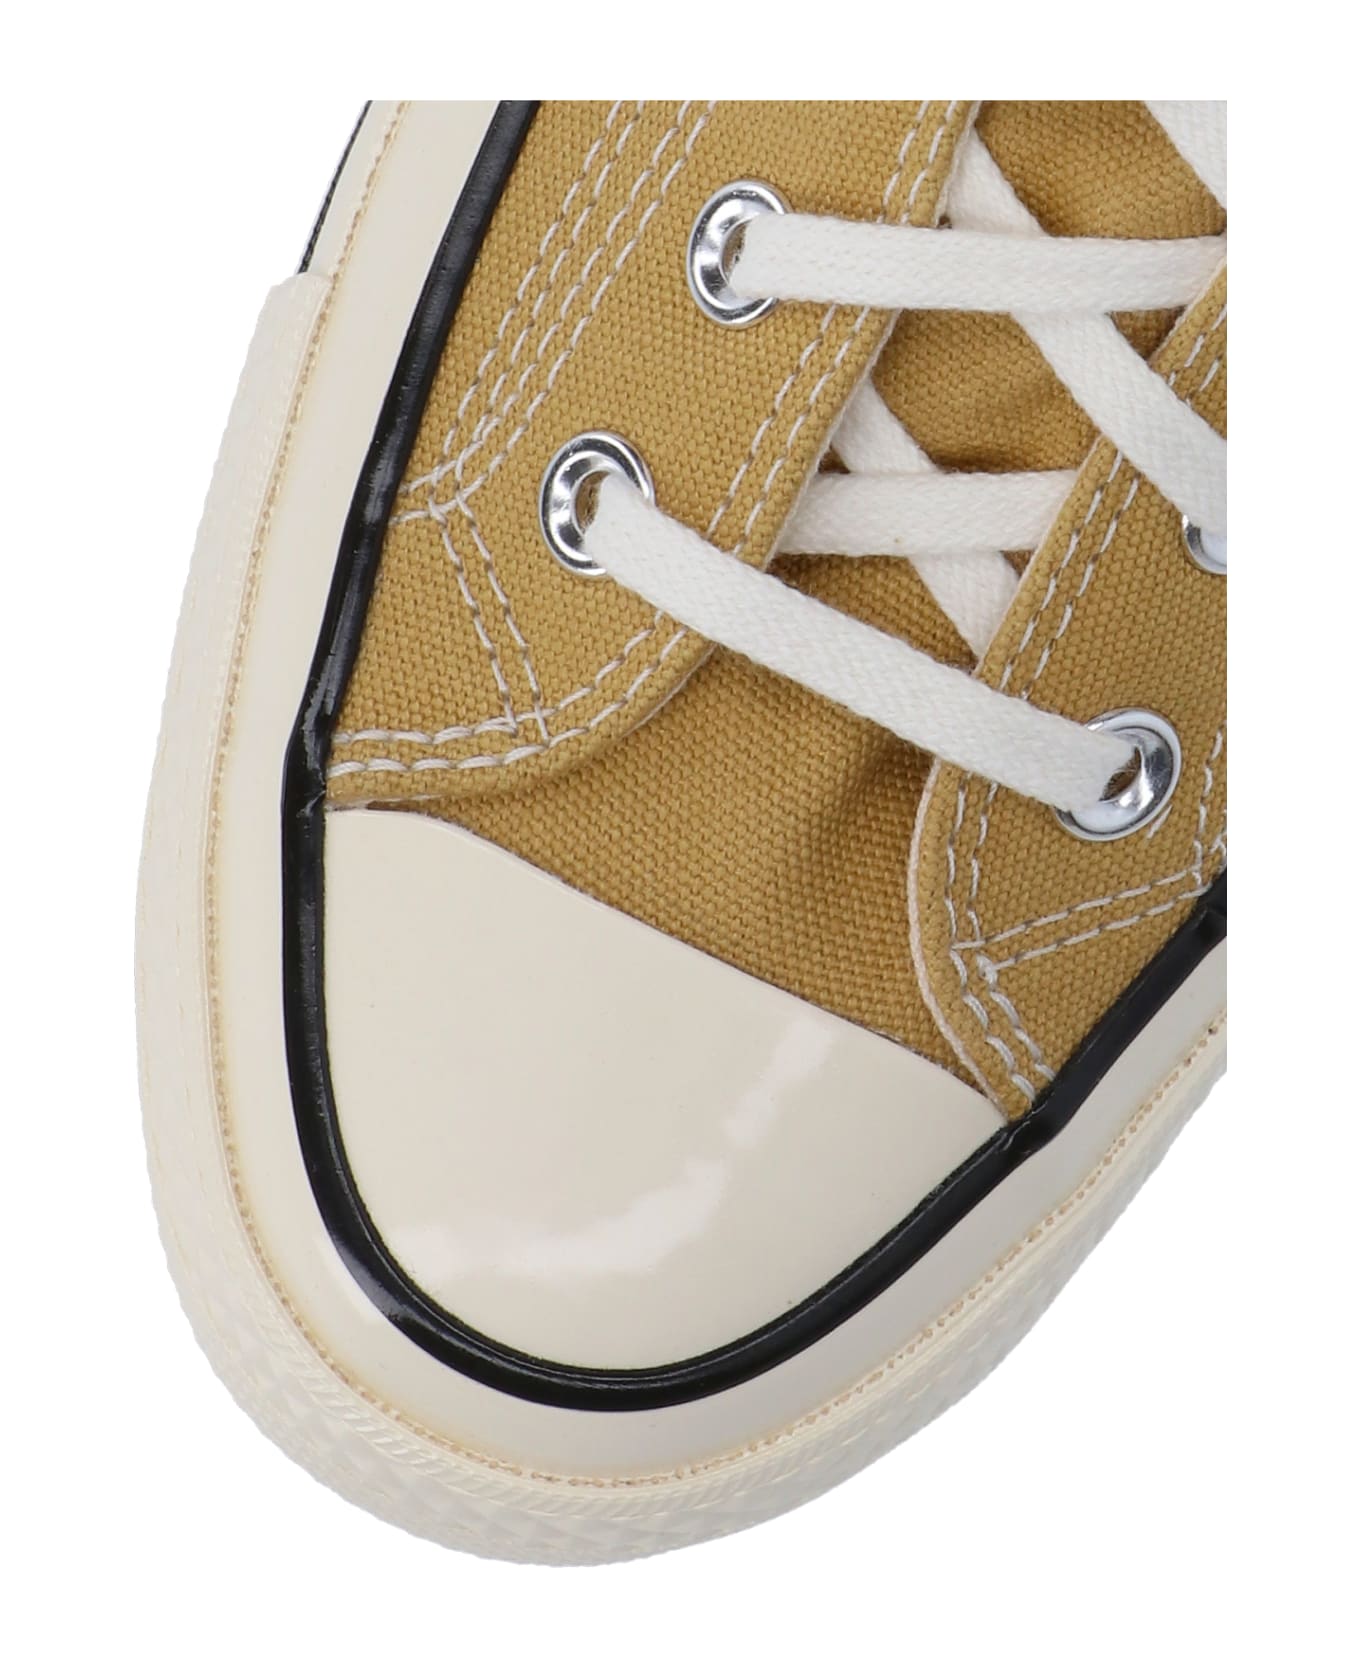 Converse "chuck 70 Vintage Canvas" Sneakers - Yellow